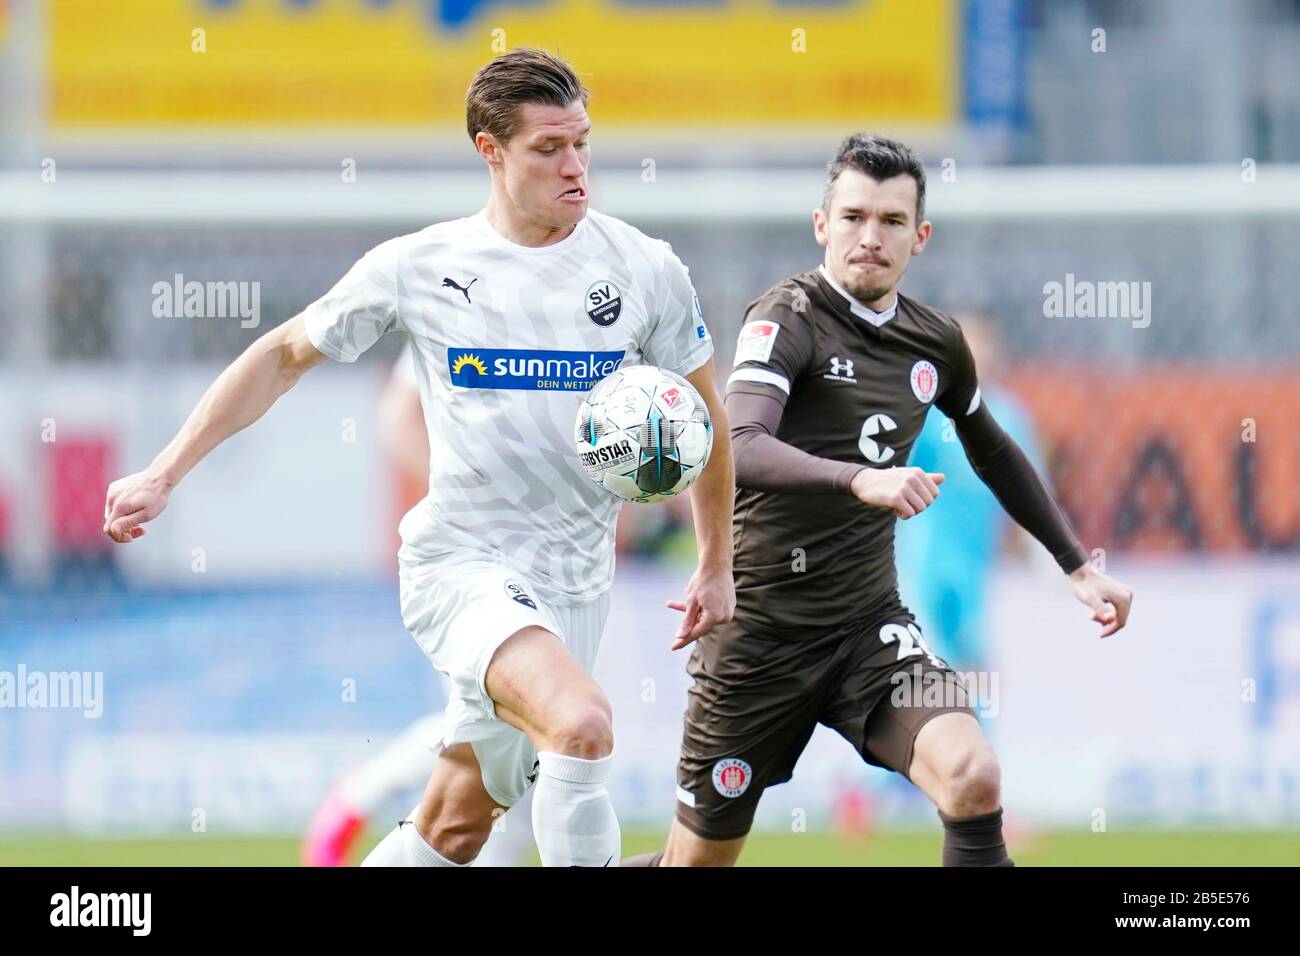 Sandhausen, Germany. 08th Mar, 2020. Football: 2nd Bundesliga, 25th matchday, SV Sandhausen - FC St. Pauli, Hardtwaldstadion. Sandhausen's Kevin Behrens (l) and St. Paulis Waldemar Sobota fight for the ball. Credit: Uwe Anspach/dpa - IMPORTANT NOTE: In accordance with the regulations of the DFL Deutsche Fußball Liga and the DFB Deutscher Fußball-Bund, it is prohibited to exploit or have exploited in the stadium and/or from the game taken photographs in the form of sequence images and/or video-like photo series./dpa/Alamy Live News Stock Photo